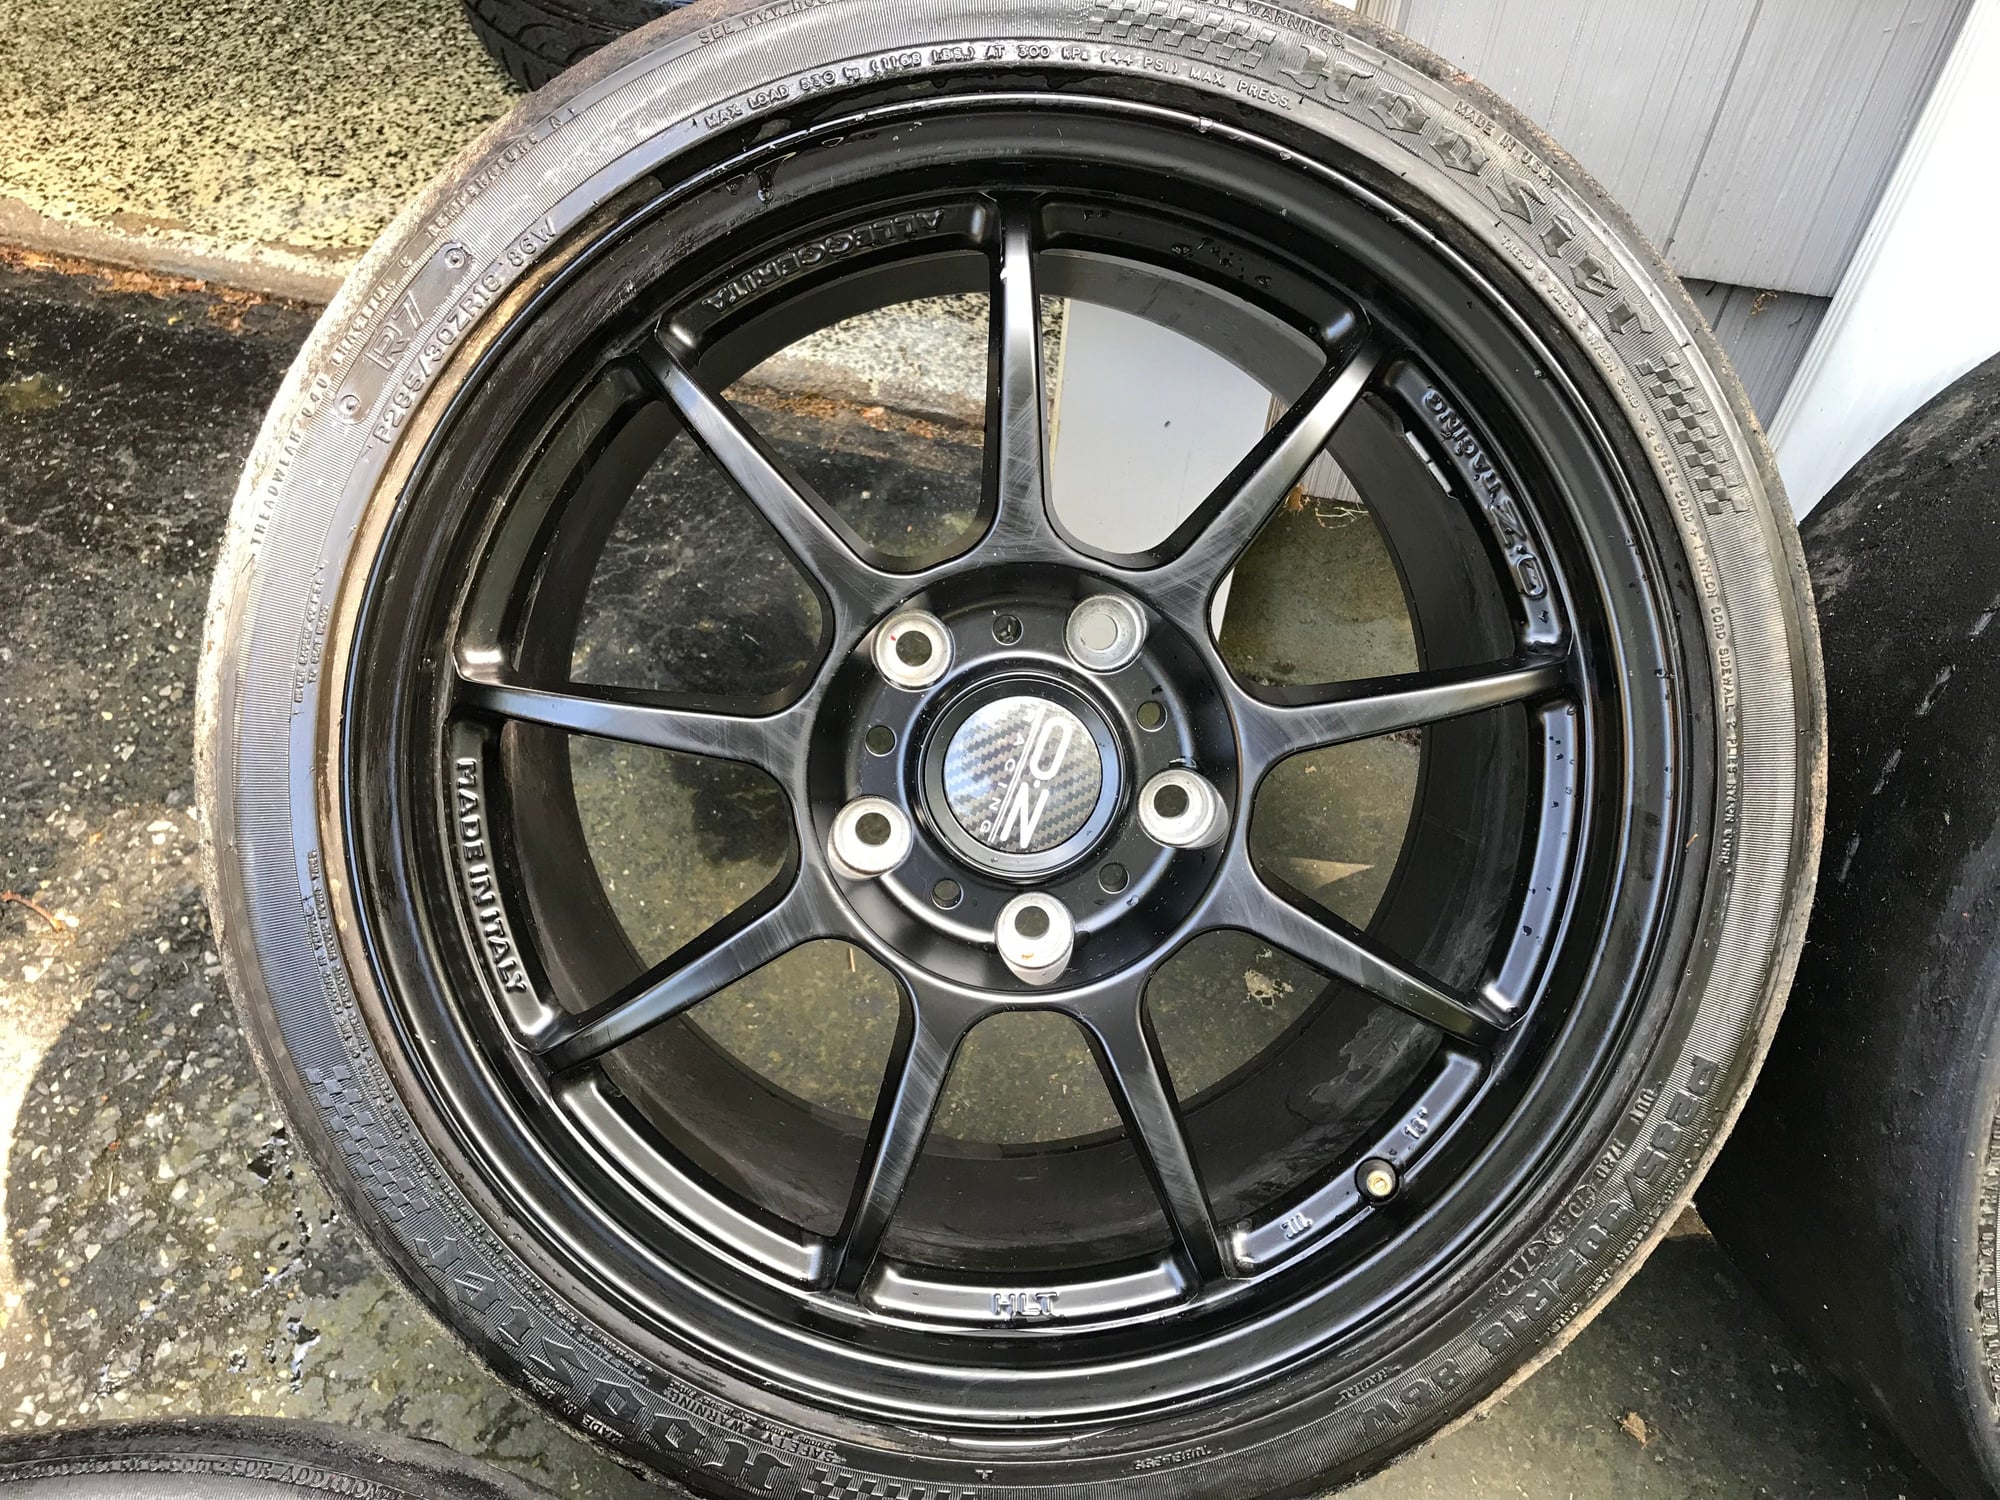 Wheels and Tires/Axles - Porsche 18" O.Z. ALLEGGERITA HLT BLK PAINT with Hossier A7 - $1700 - Used - 1999 to 2004 Porsche 911 - St James, NY 11780, United States